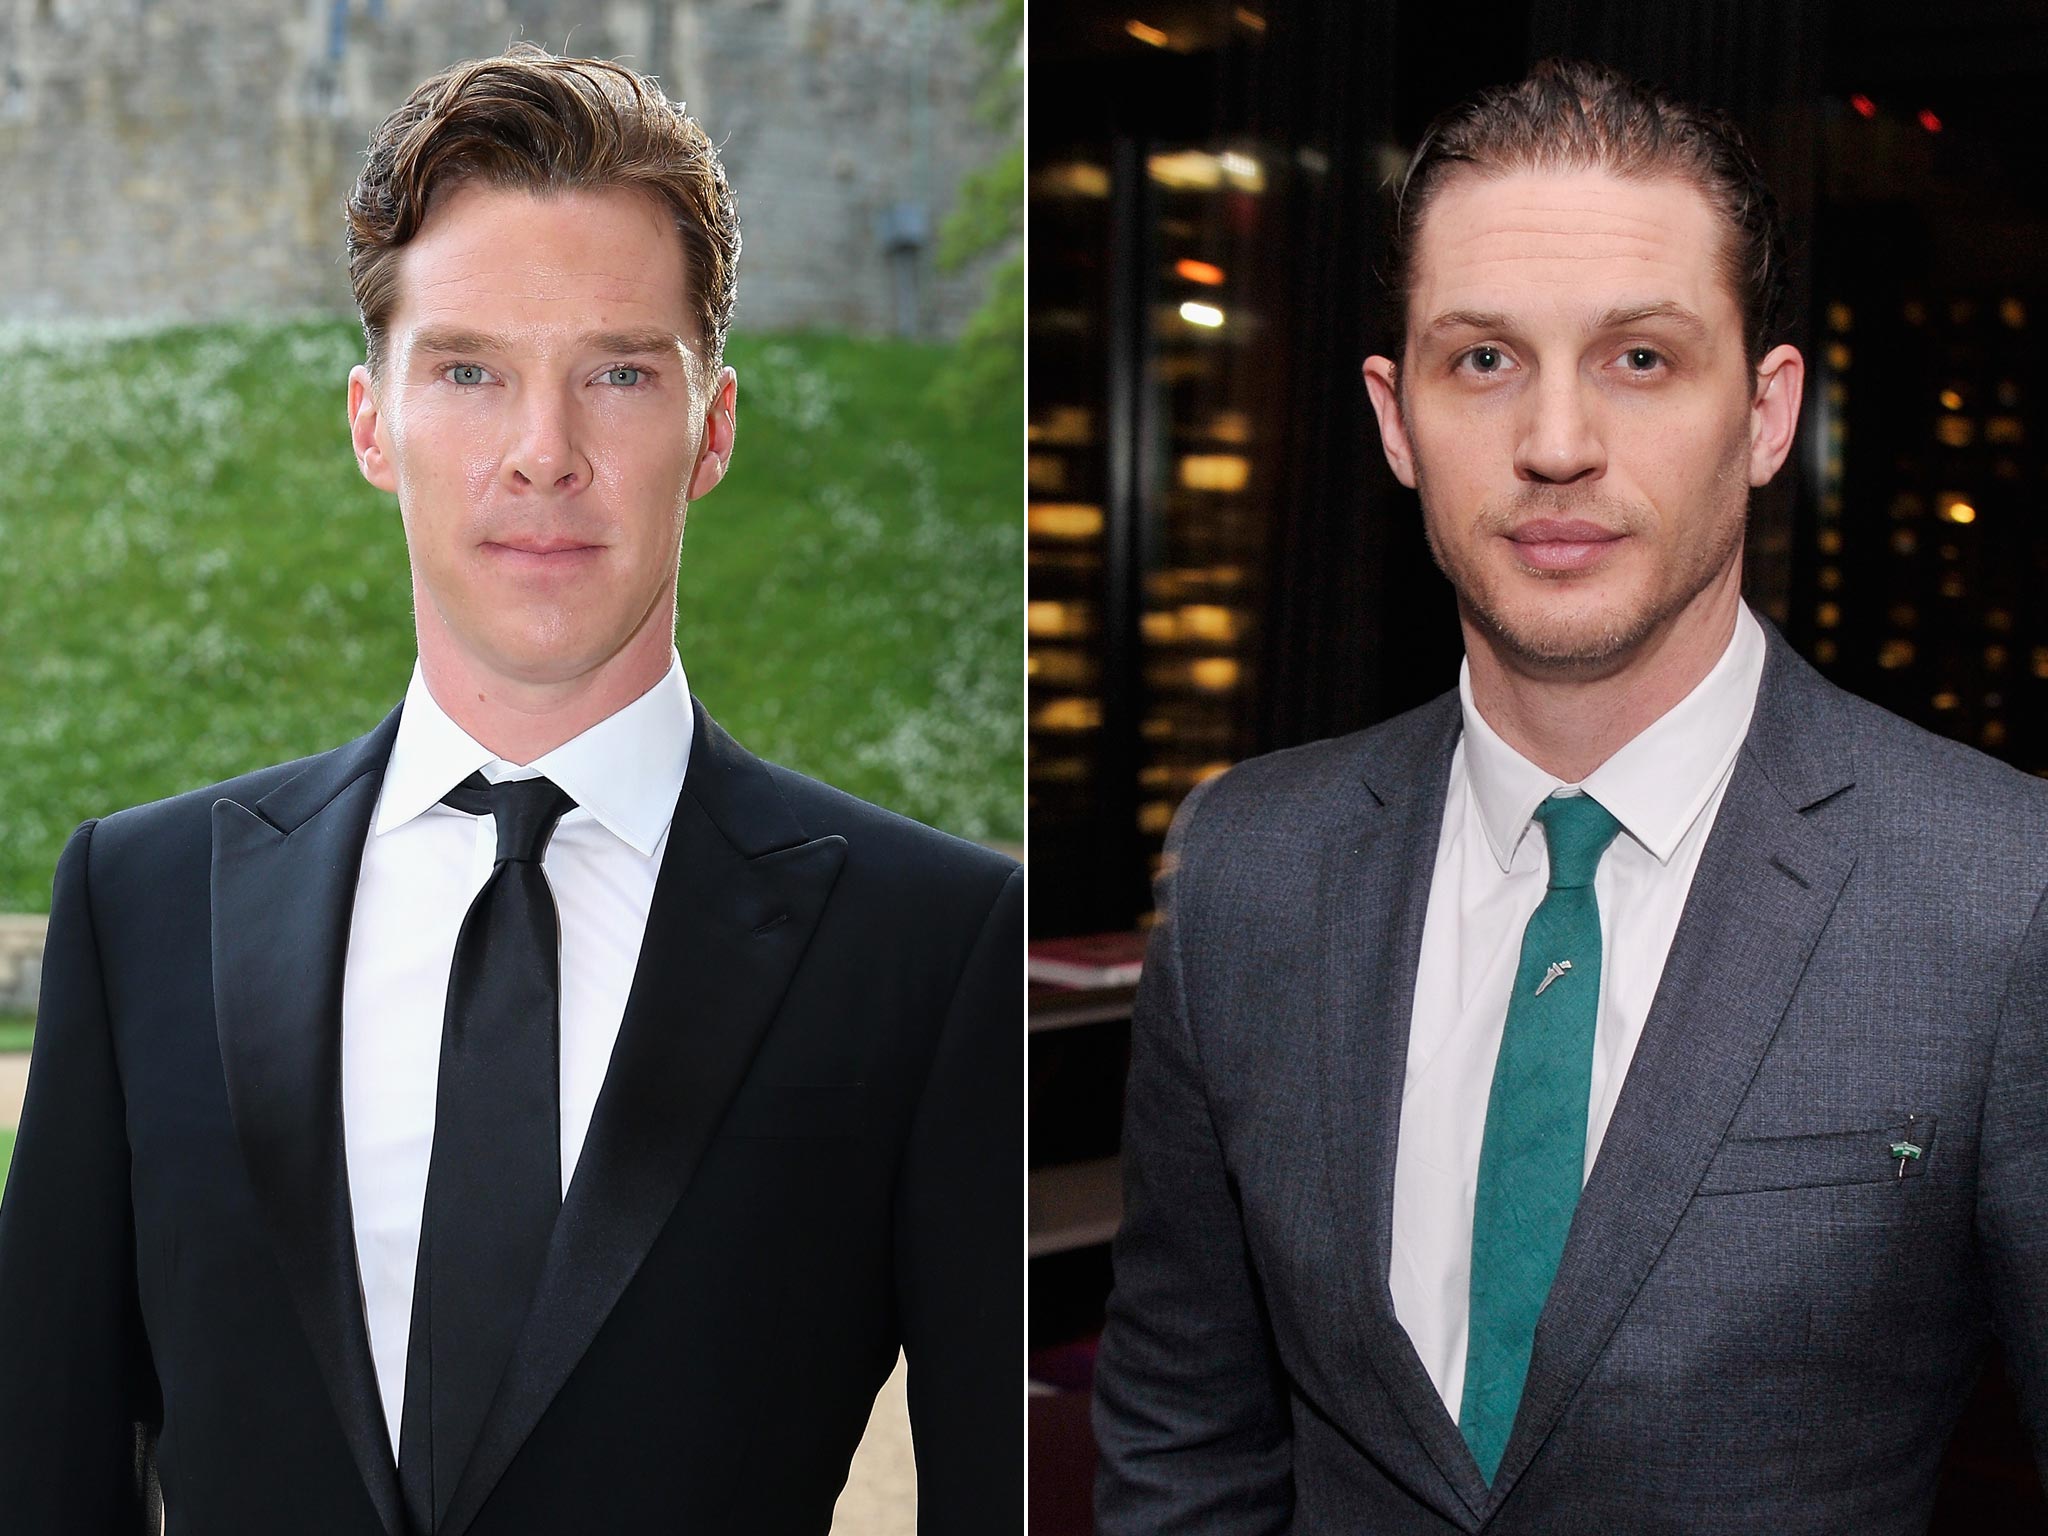 Benedict Cumberbatch (left) is facing stiff competition from Tom Hardy for the role of Doctor Strange